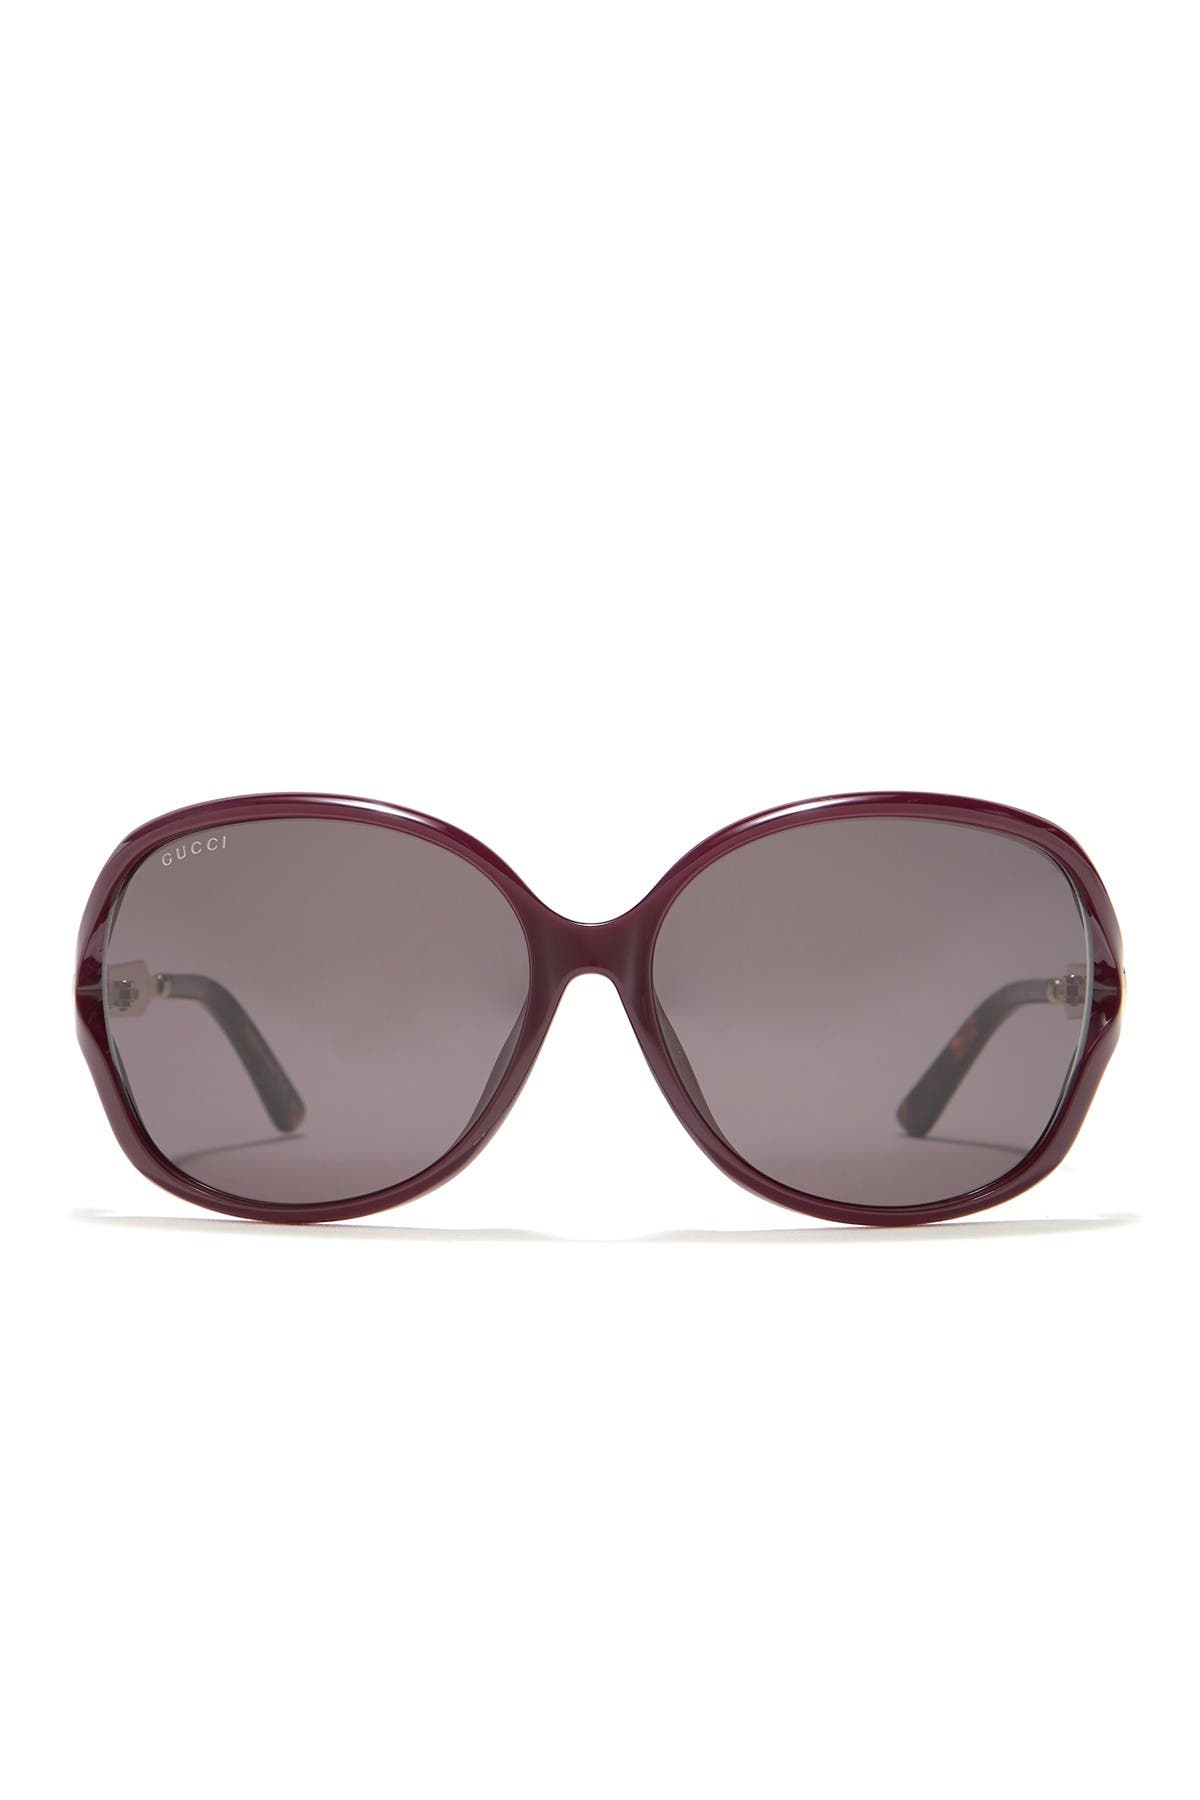 Gucci 62mm Oversized Sunglasses In Burgundy Gold Grey